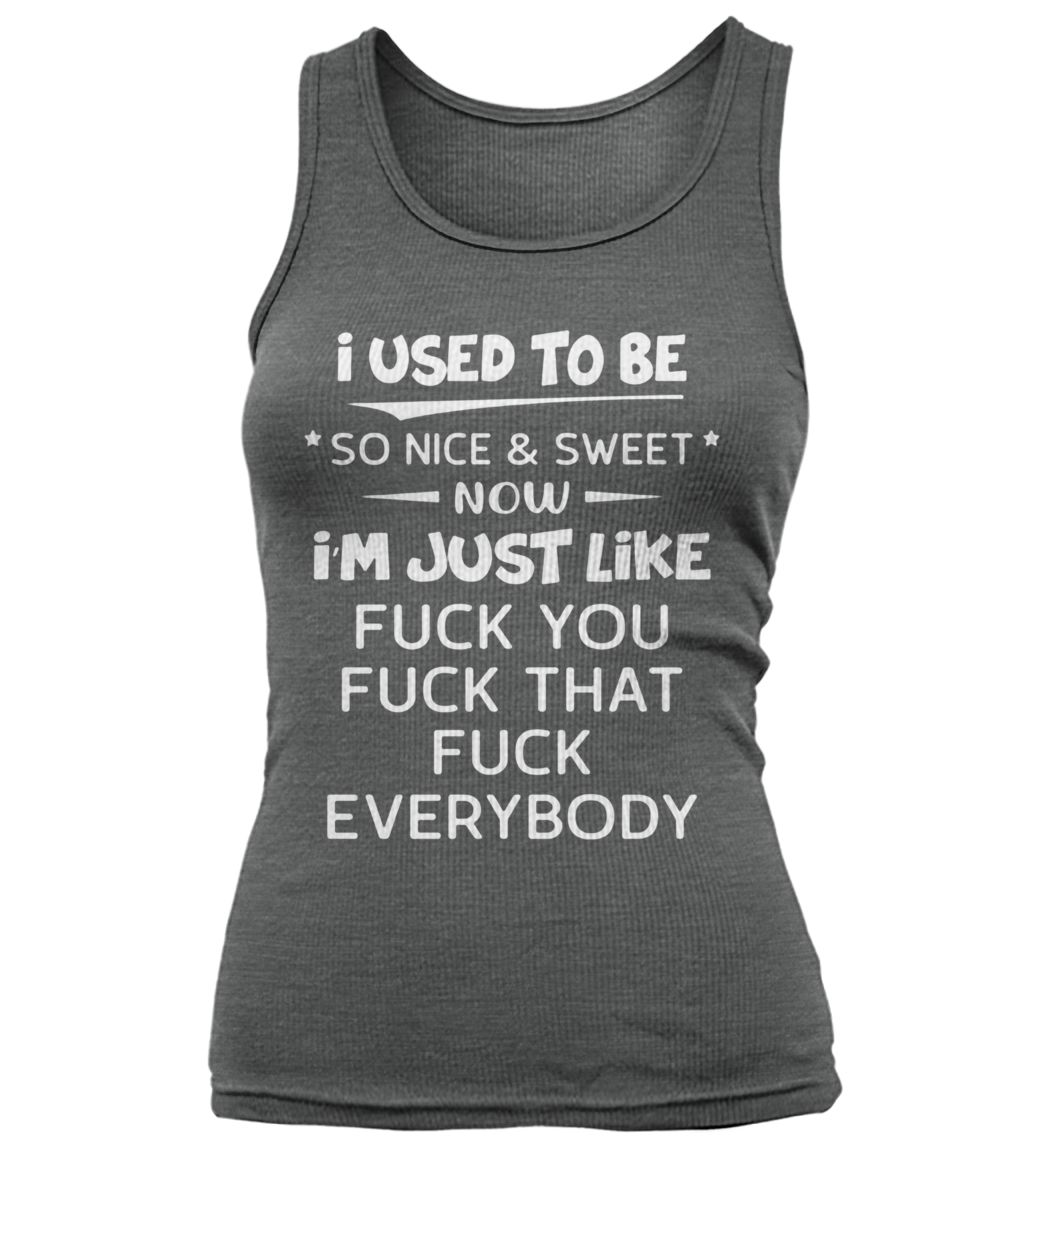 I used to be so nice and sweet now I'm just like fuck you women's tank top